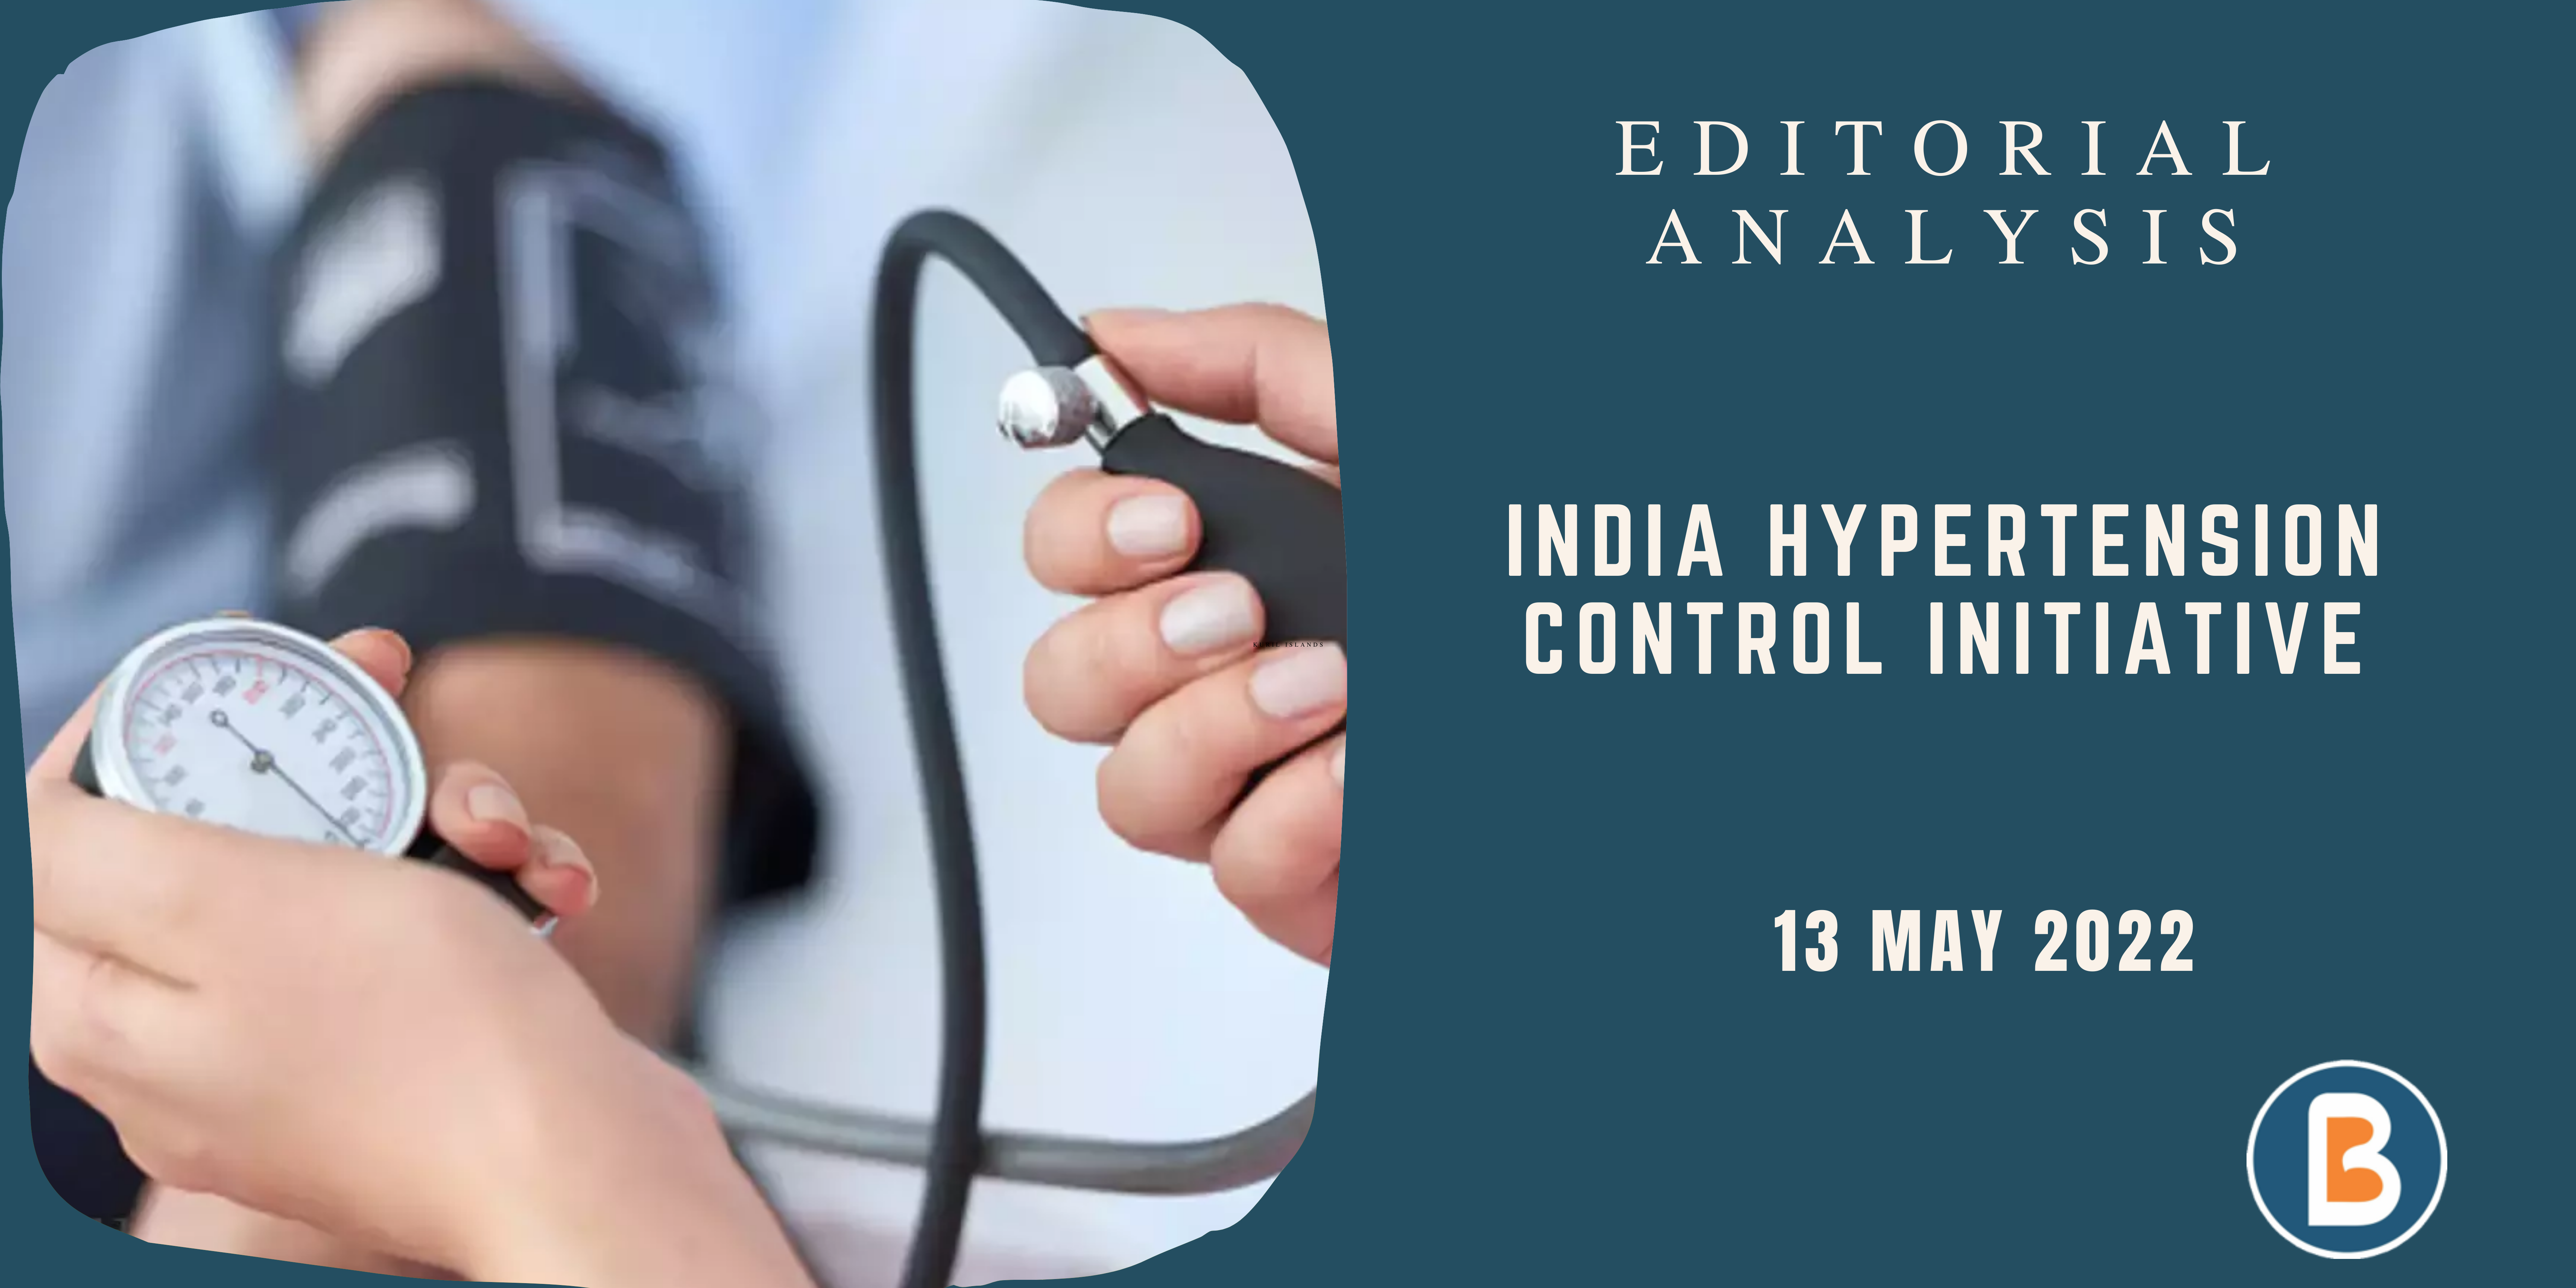 Editorial Analysis for IAS - India Hypertension Control Initiative